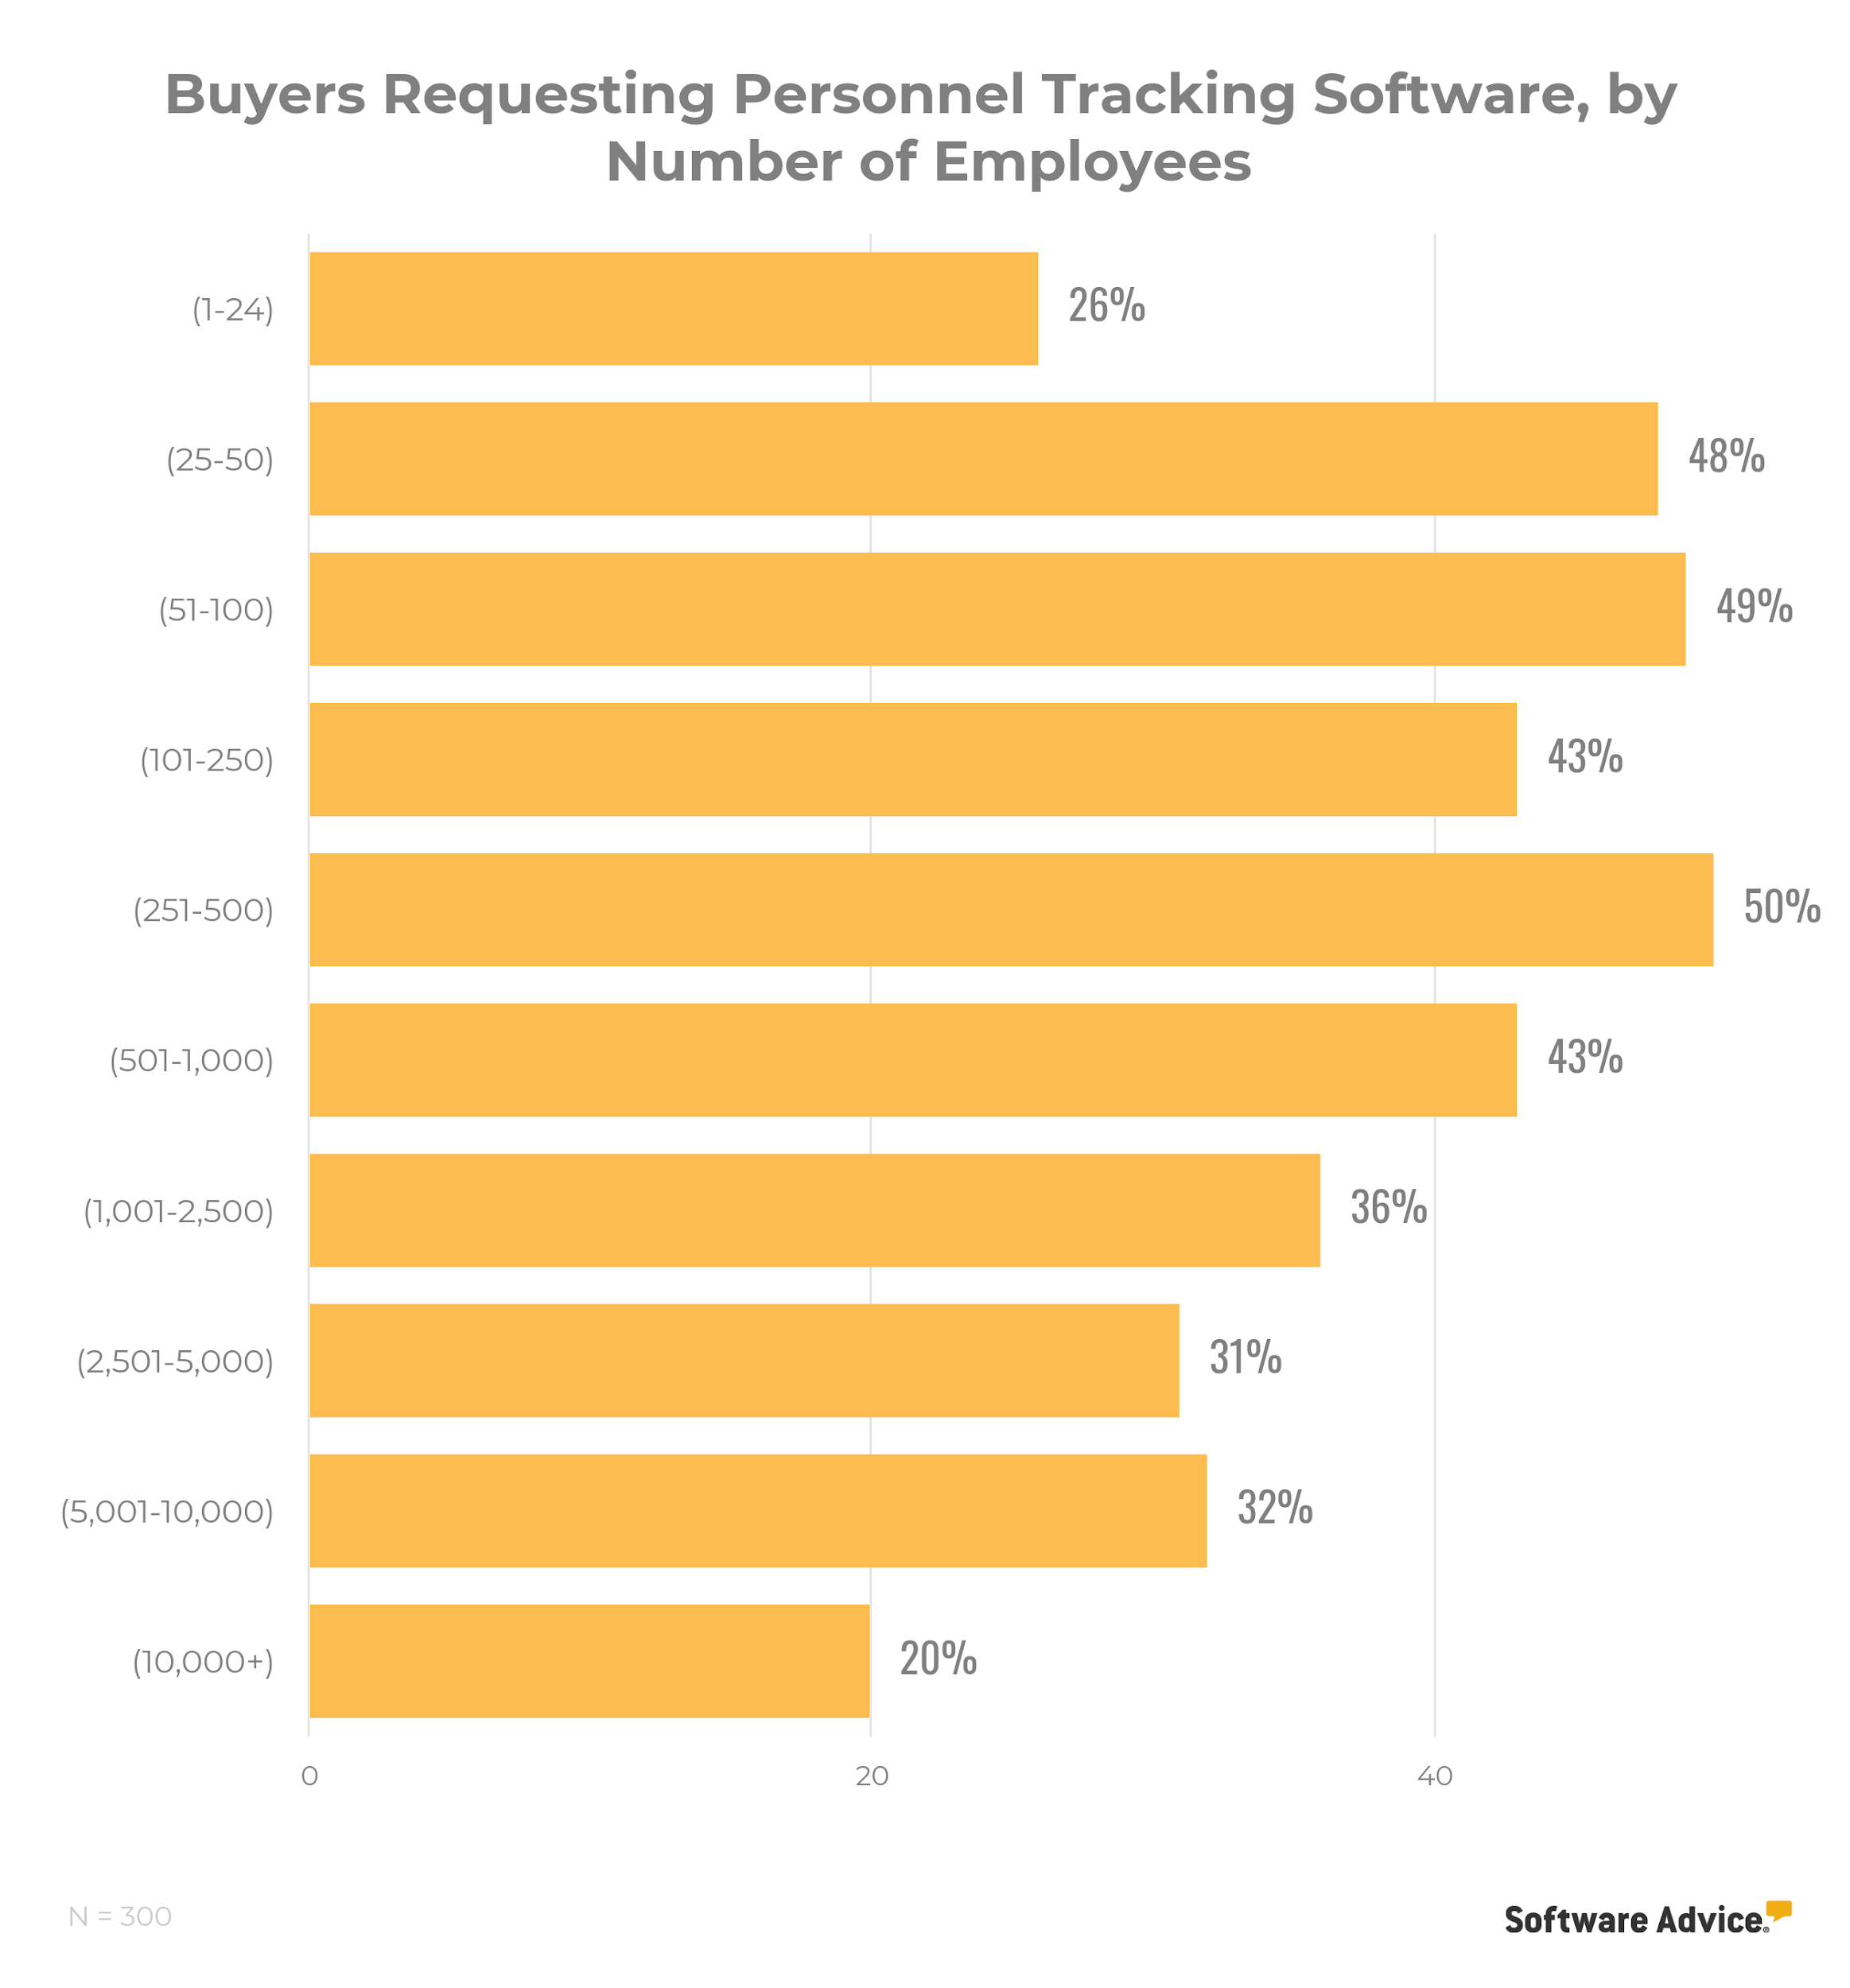 chart-showing-interest-in-this-software-peaks-in-businesses-with-1-1,000-employees